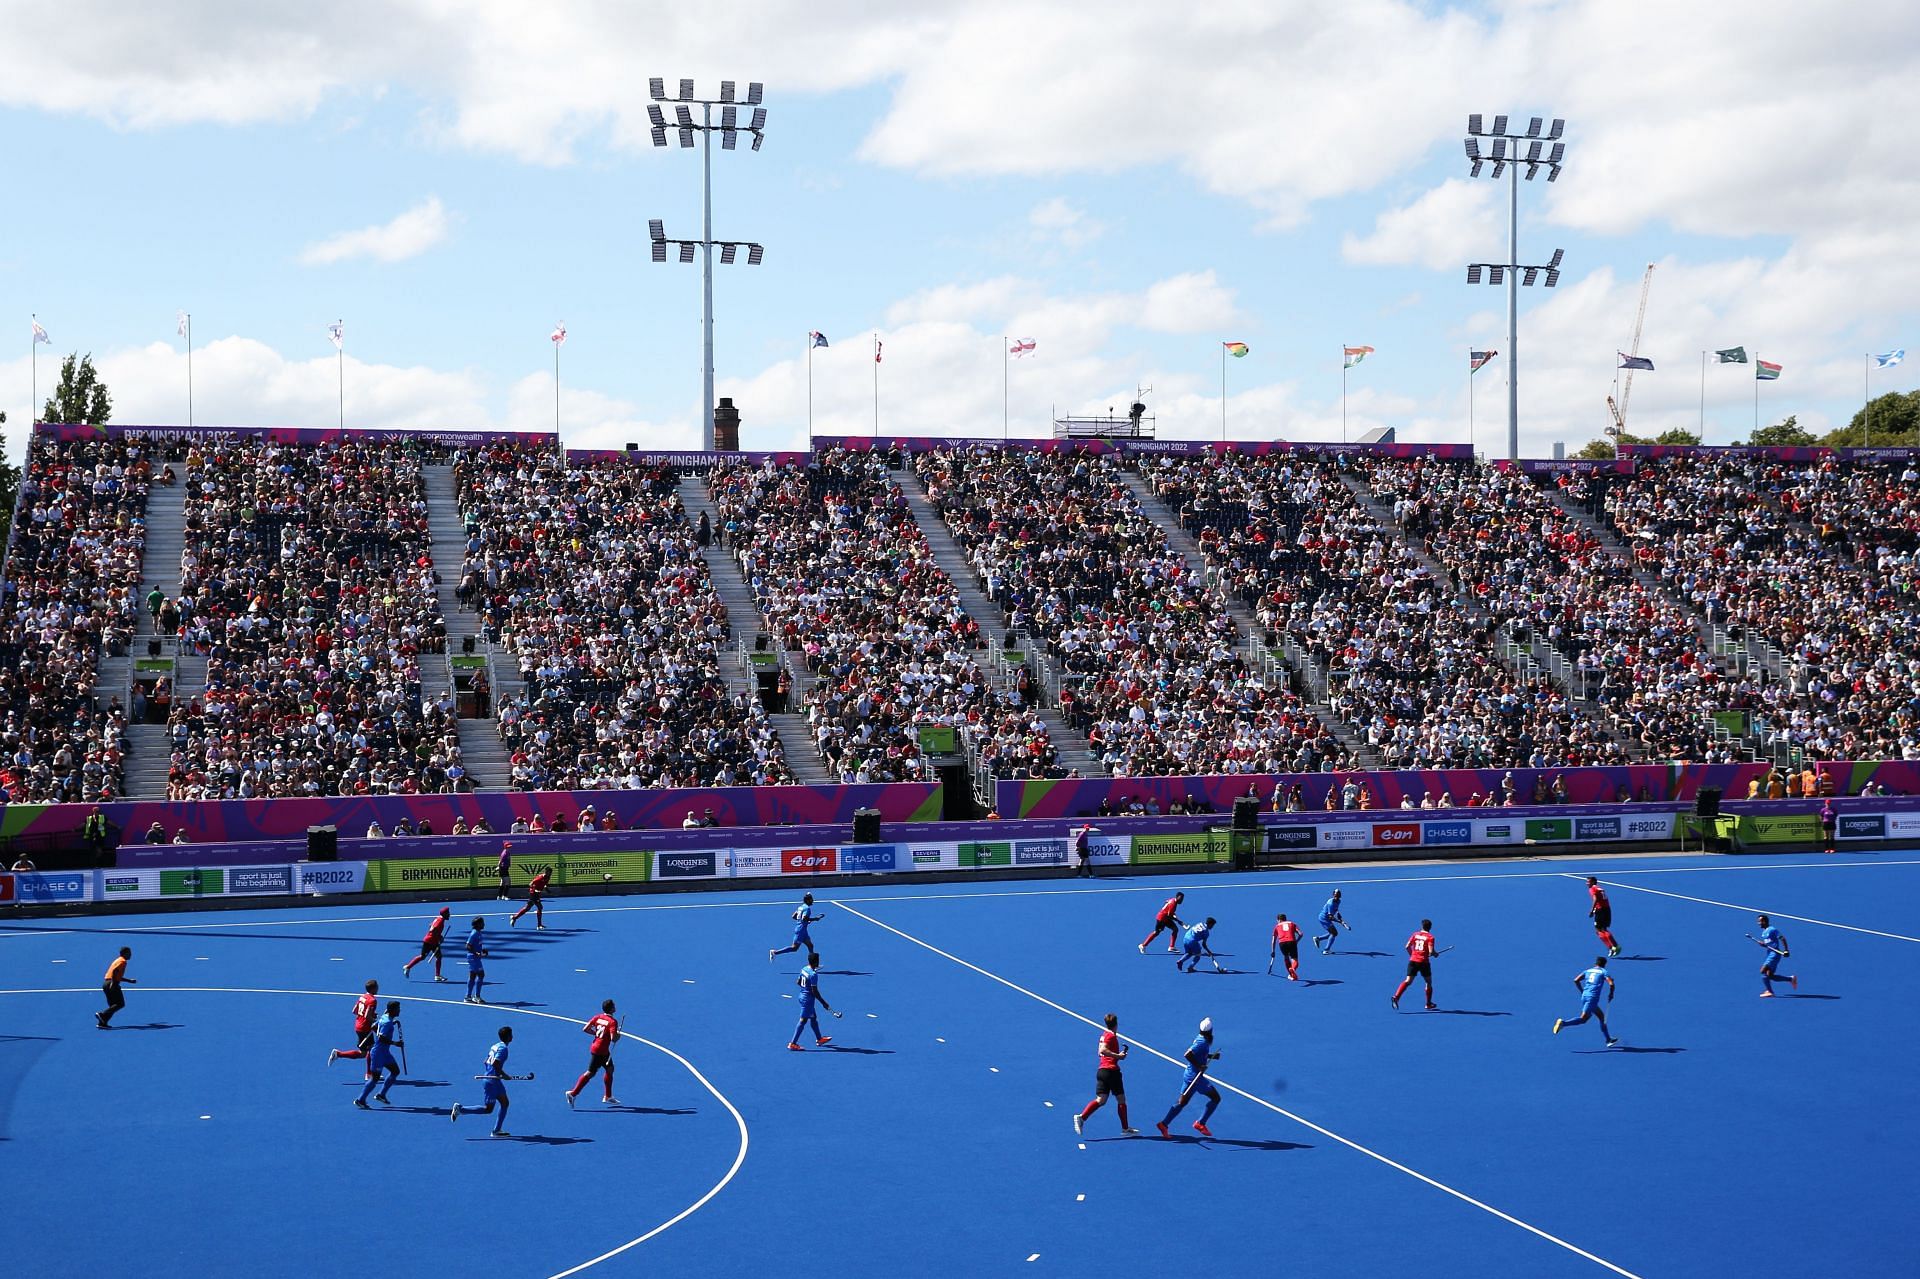 Hockey - Commonwealth Games: Day 6 (Image courtesy: Getty)